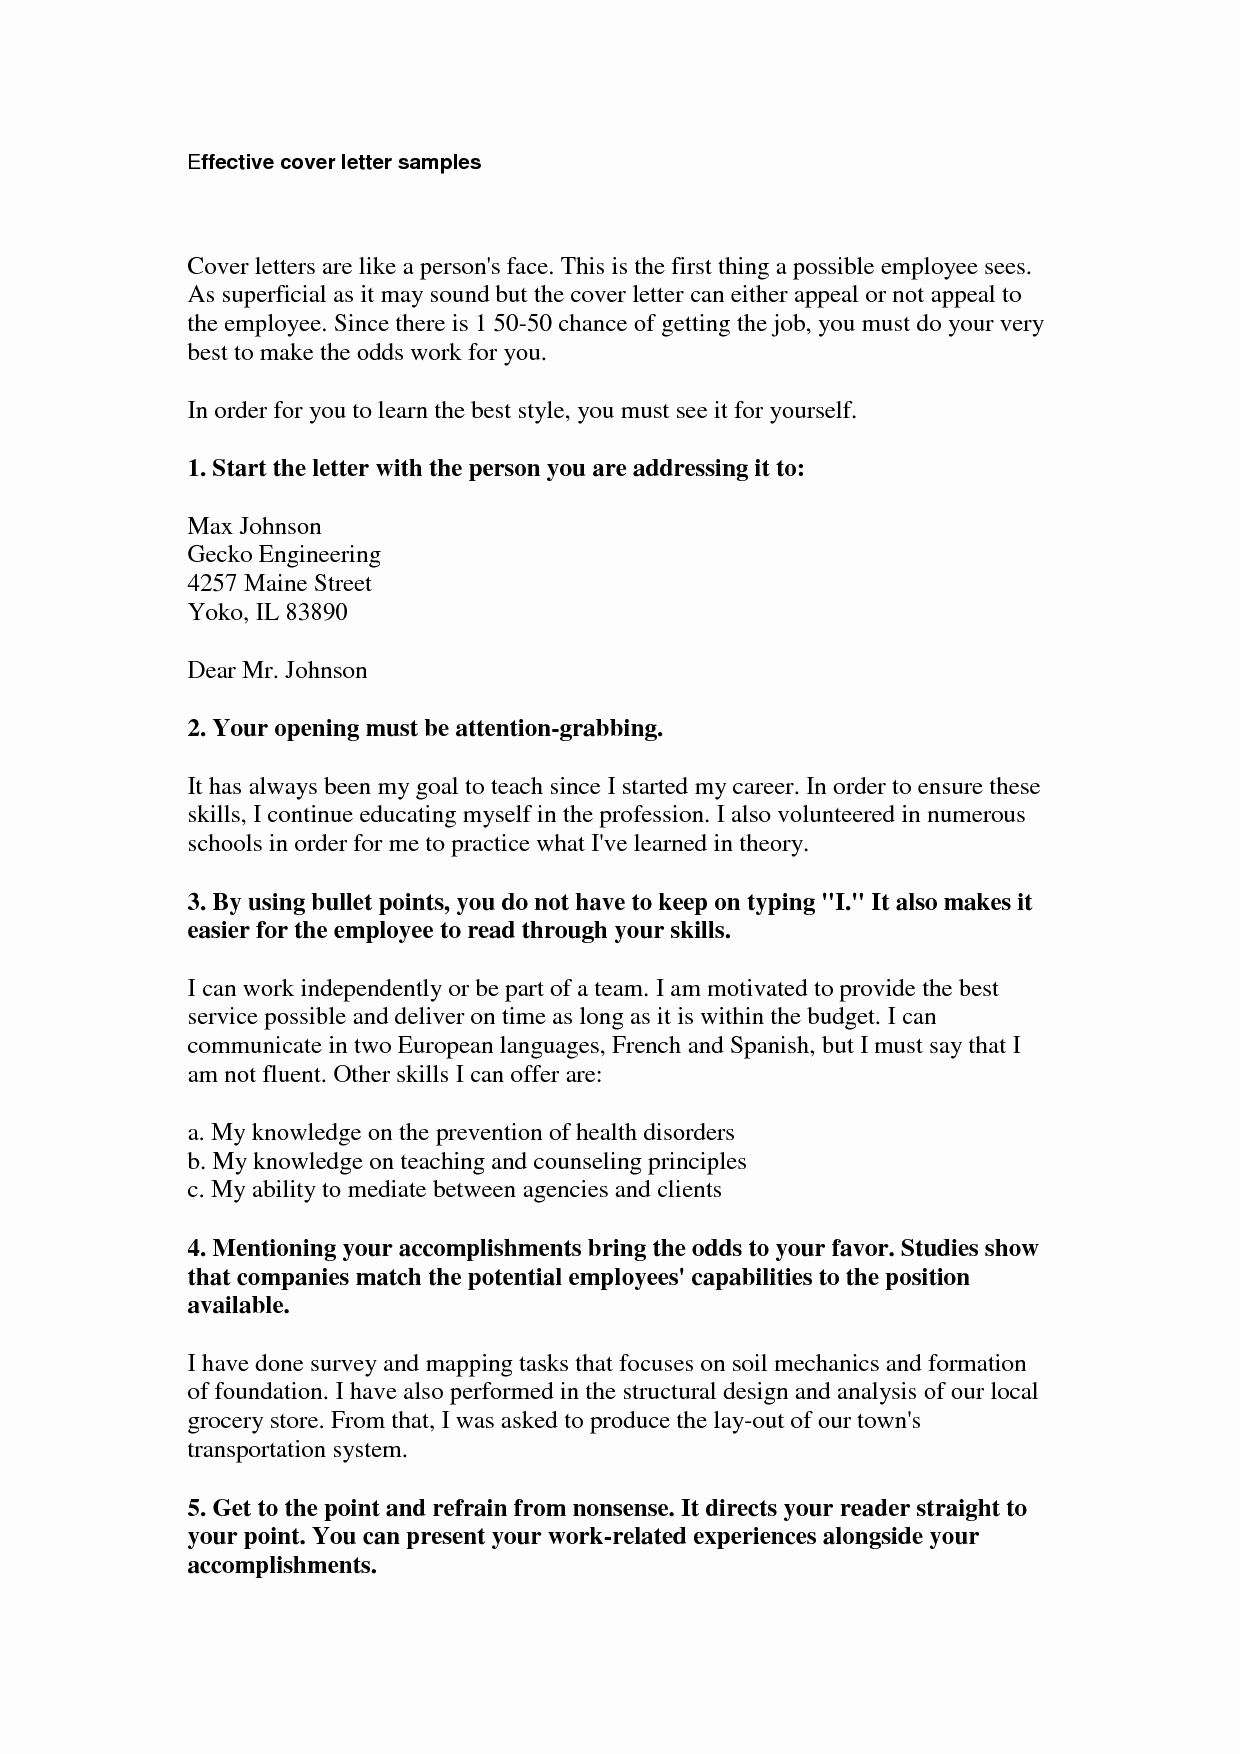 Writing An Effective Cover Letter